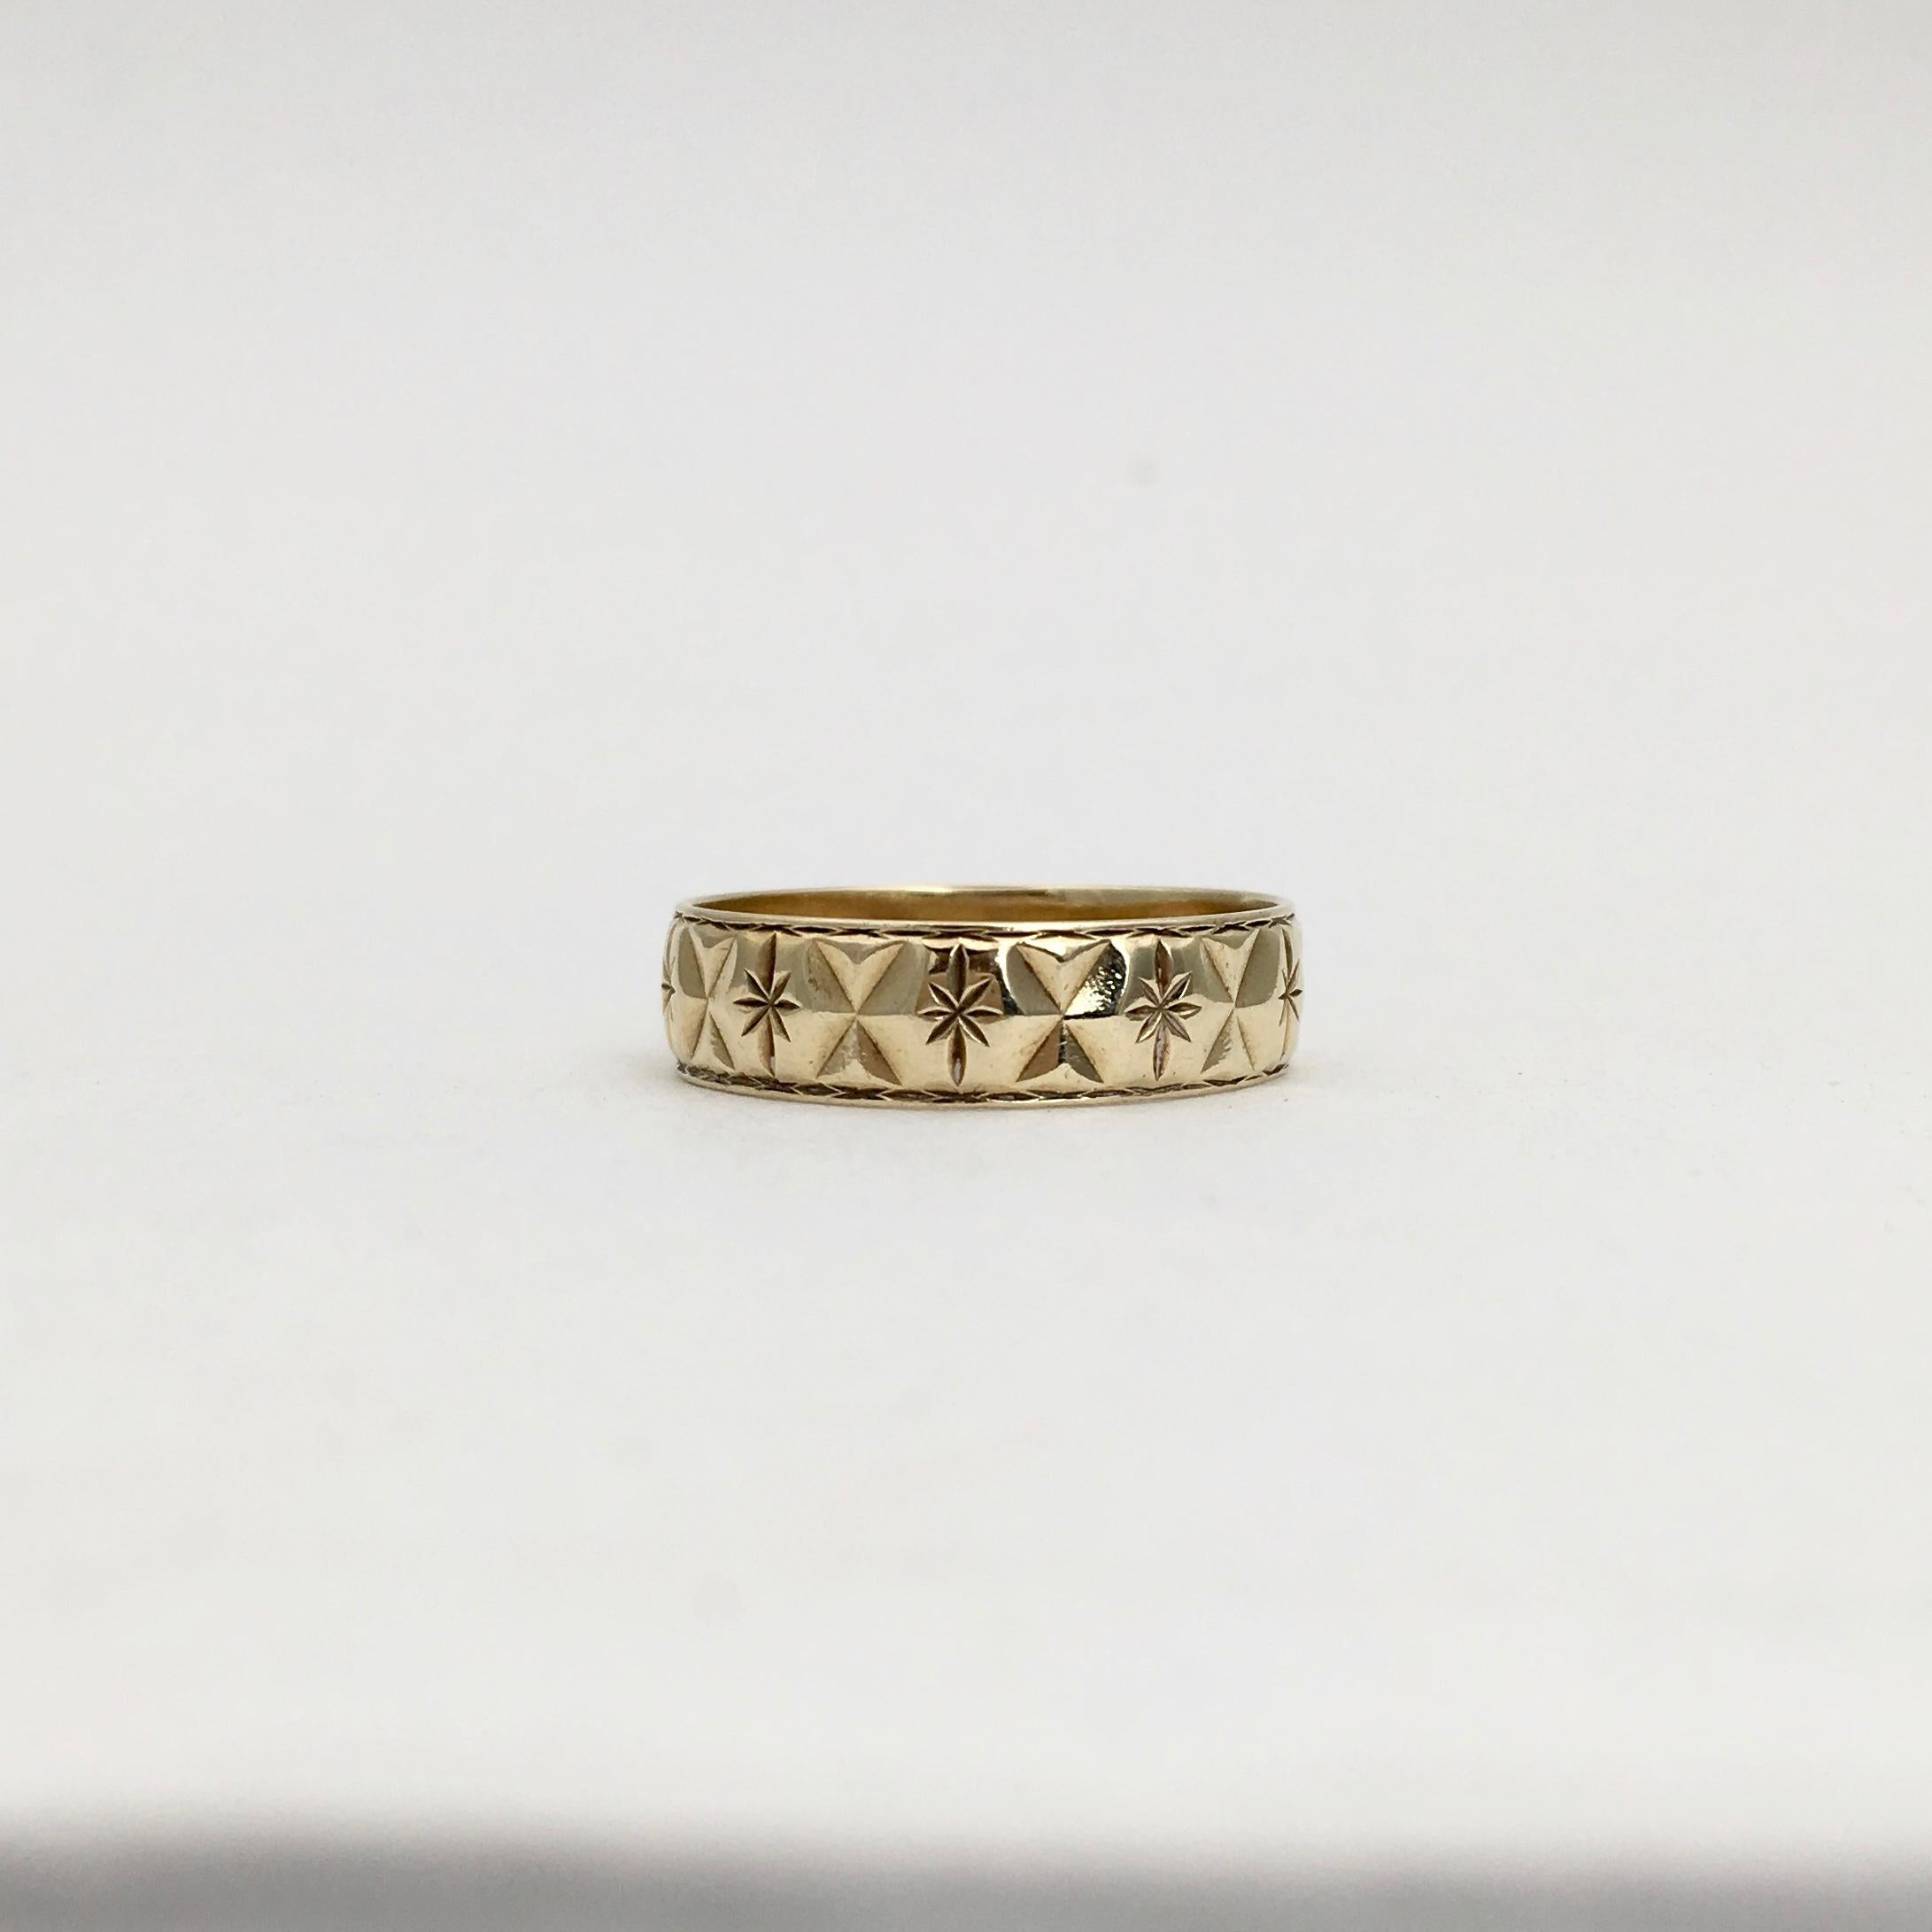 This lovely 9ct gold ring has stylish etching all the way around the band. A full set of hallmarks date the ring to 1986 and indicate that it was made in London, England. The ring is also engraved lightly with 'B961 - N' inside the band. It makes